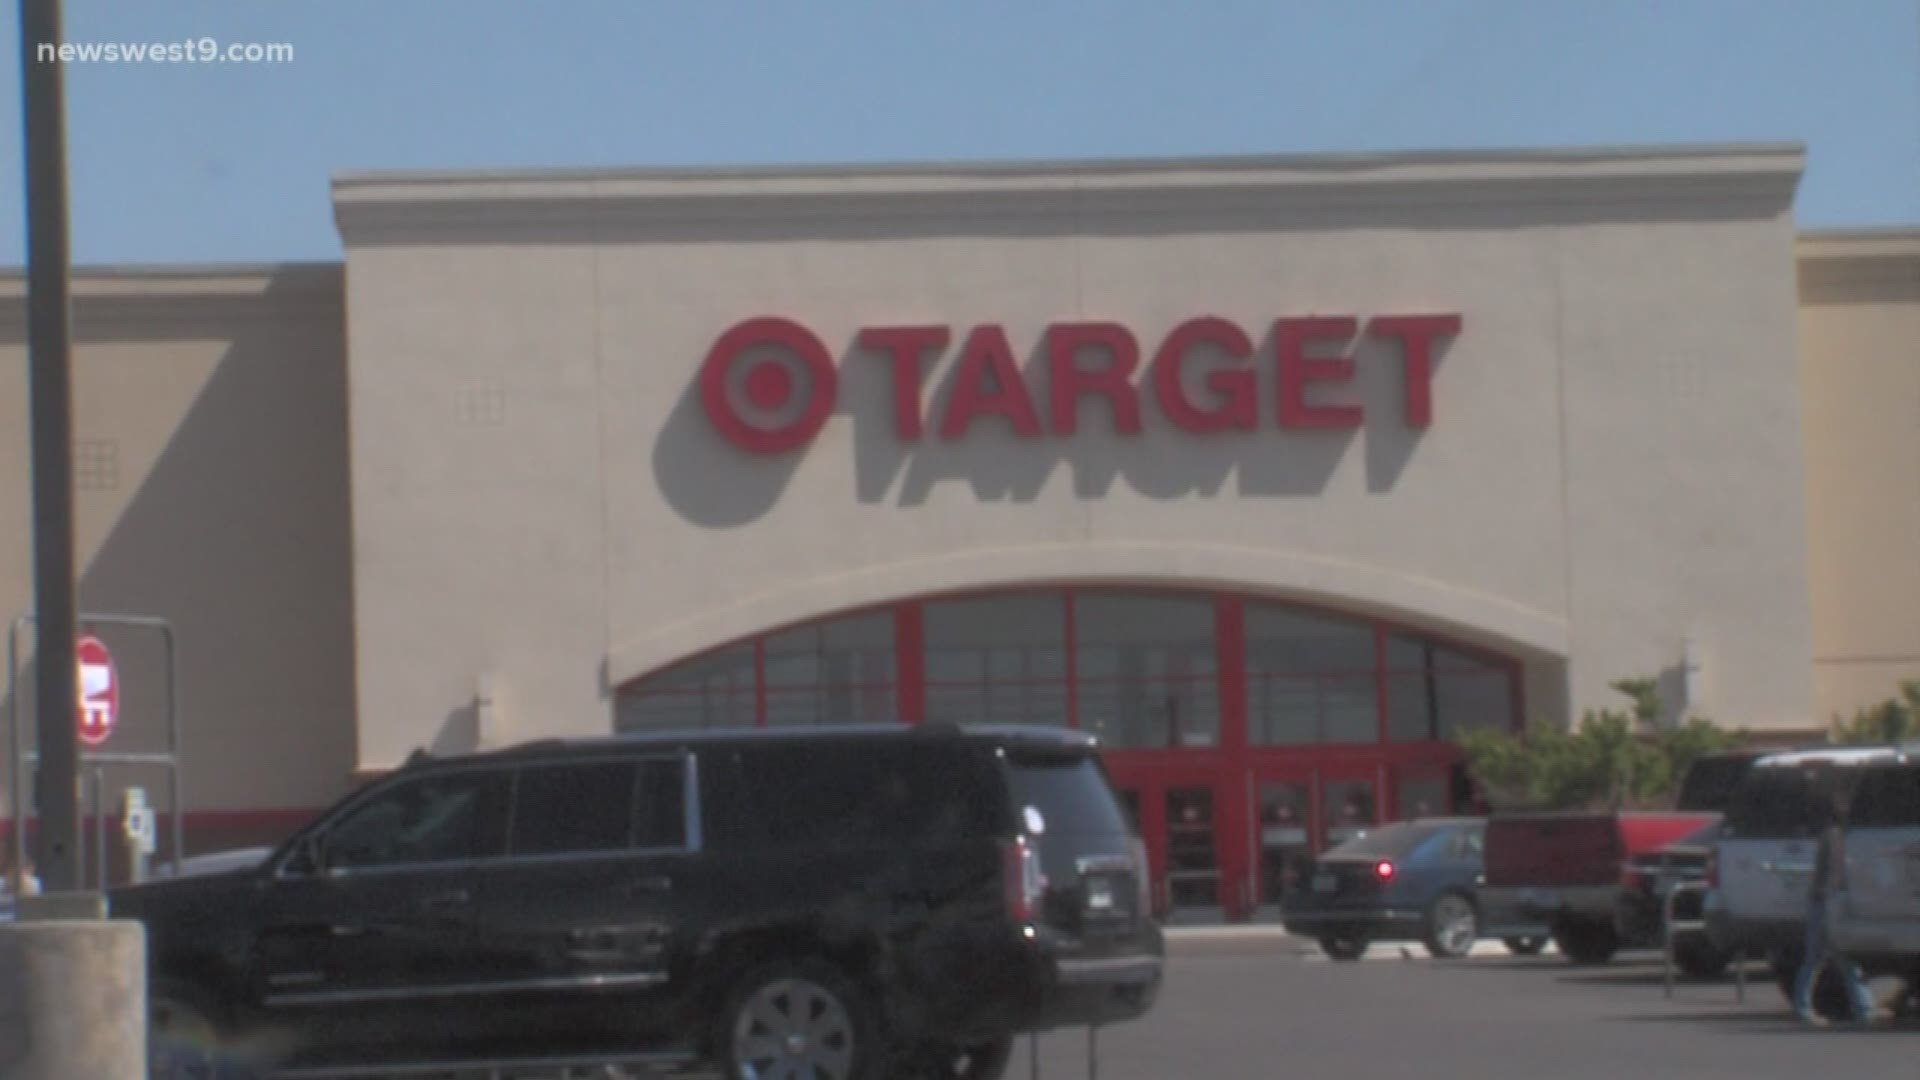 Target was evacuated due to gas leak